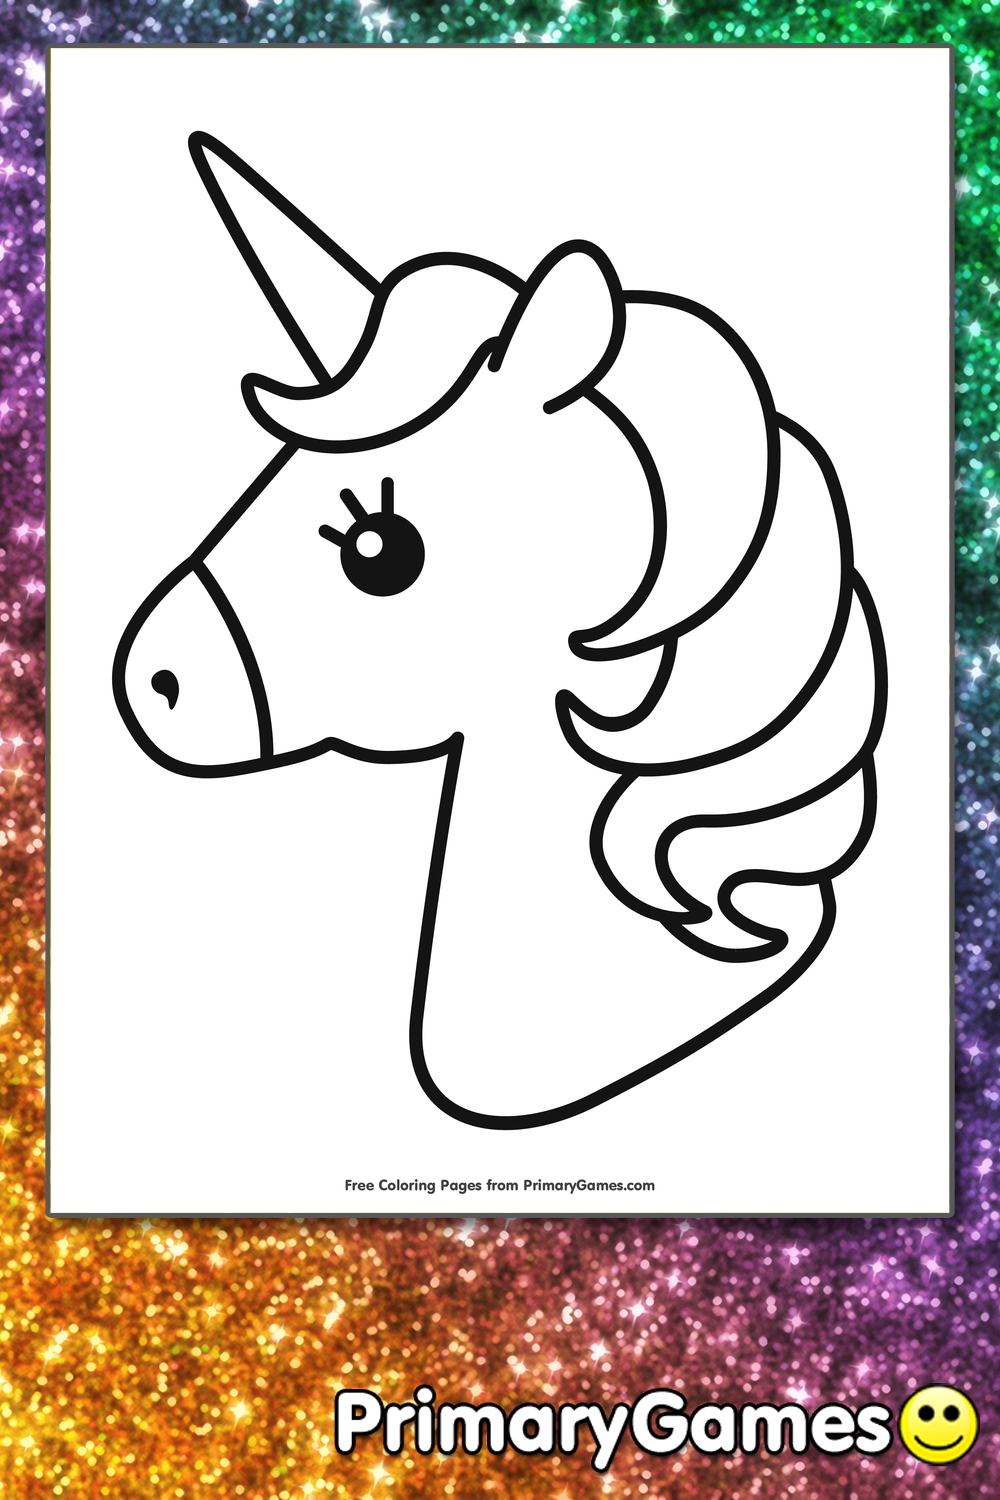 Cute Unicorn Coloring Page Free Printable Pdf From Primarygames